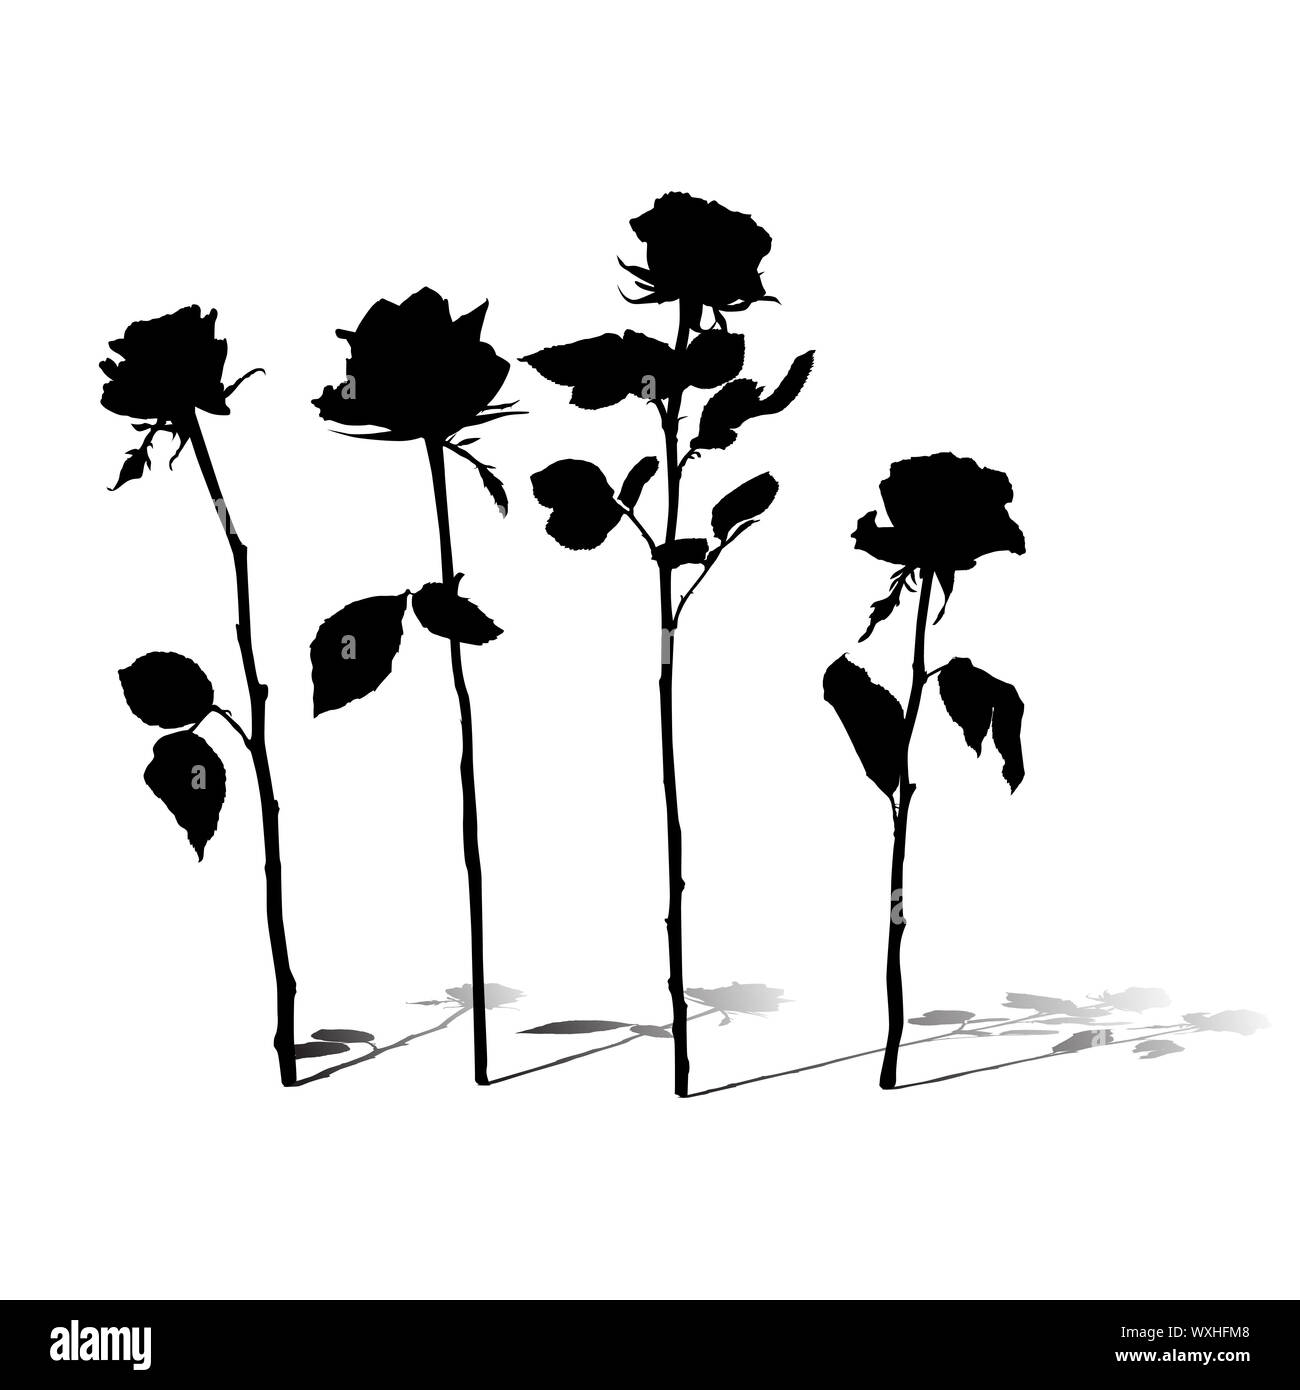 Roses silhouettes collection with shadows isolated on white Stock Photo